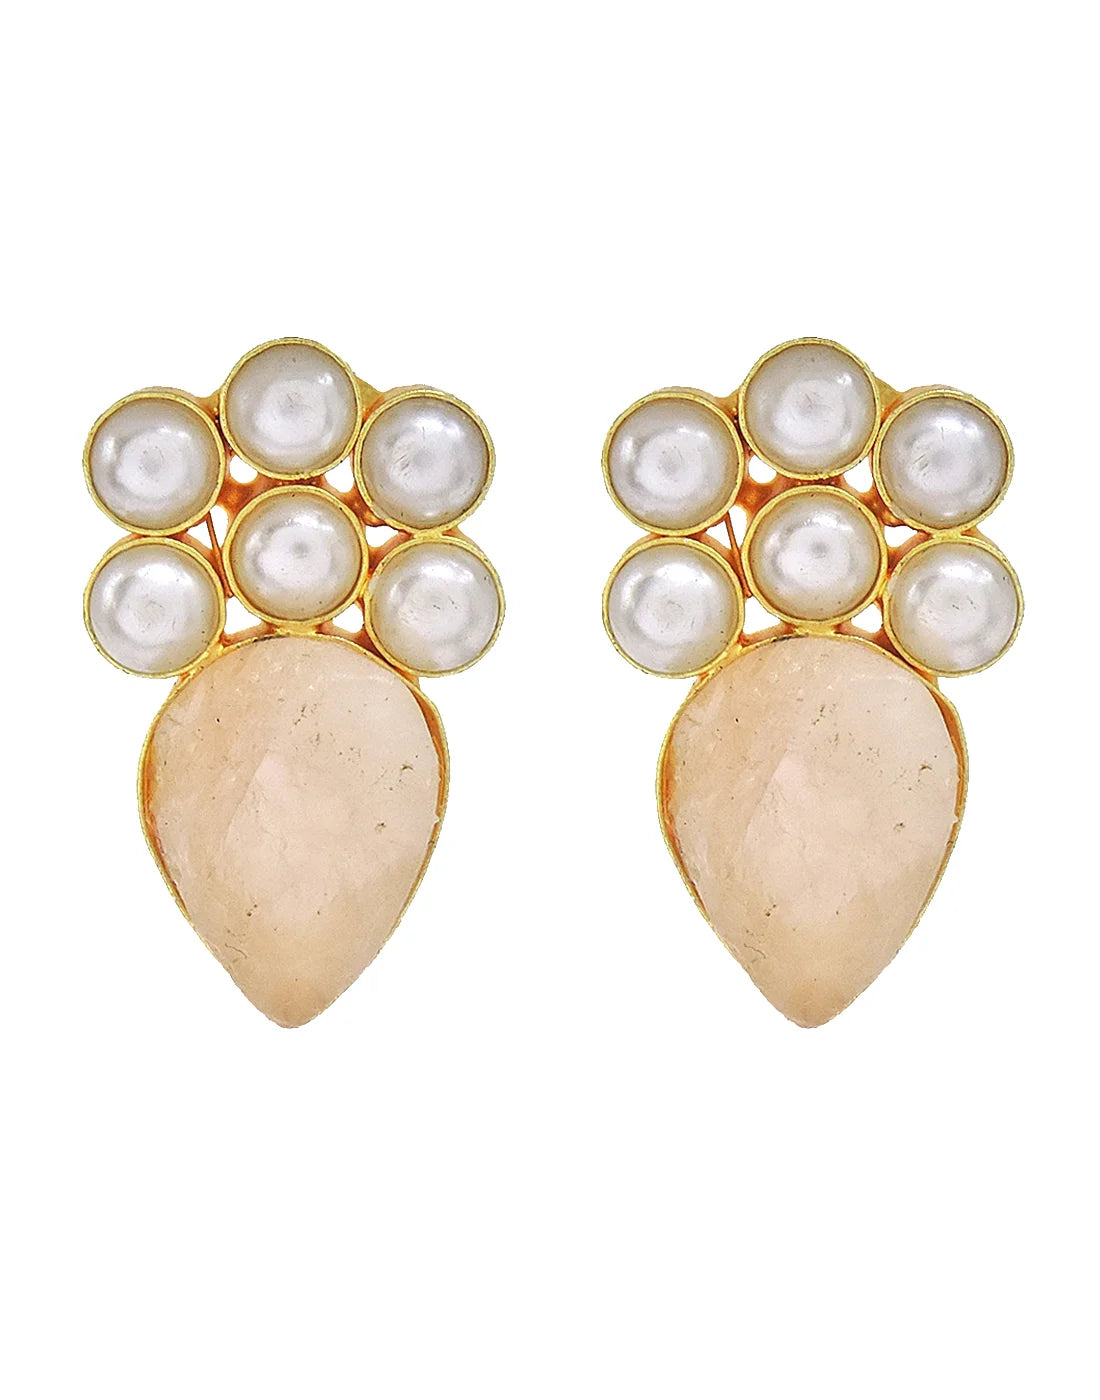 Rose Quartz & Pearl Cluster Earrings- Handcrafted Jewellery from Dori